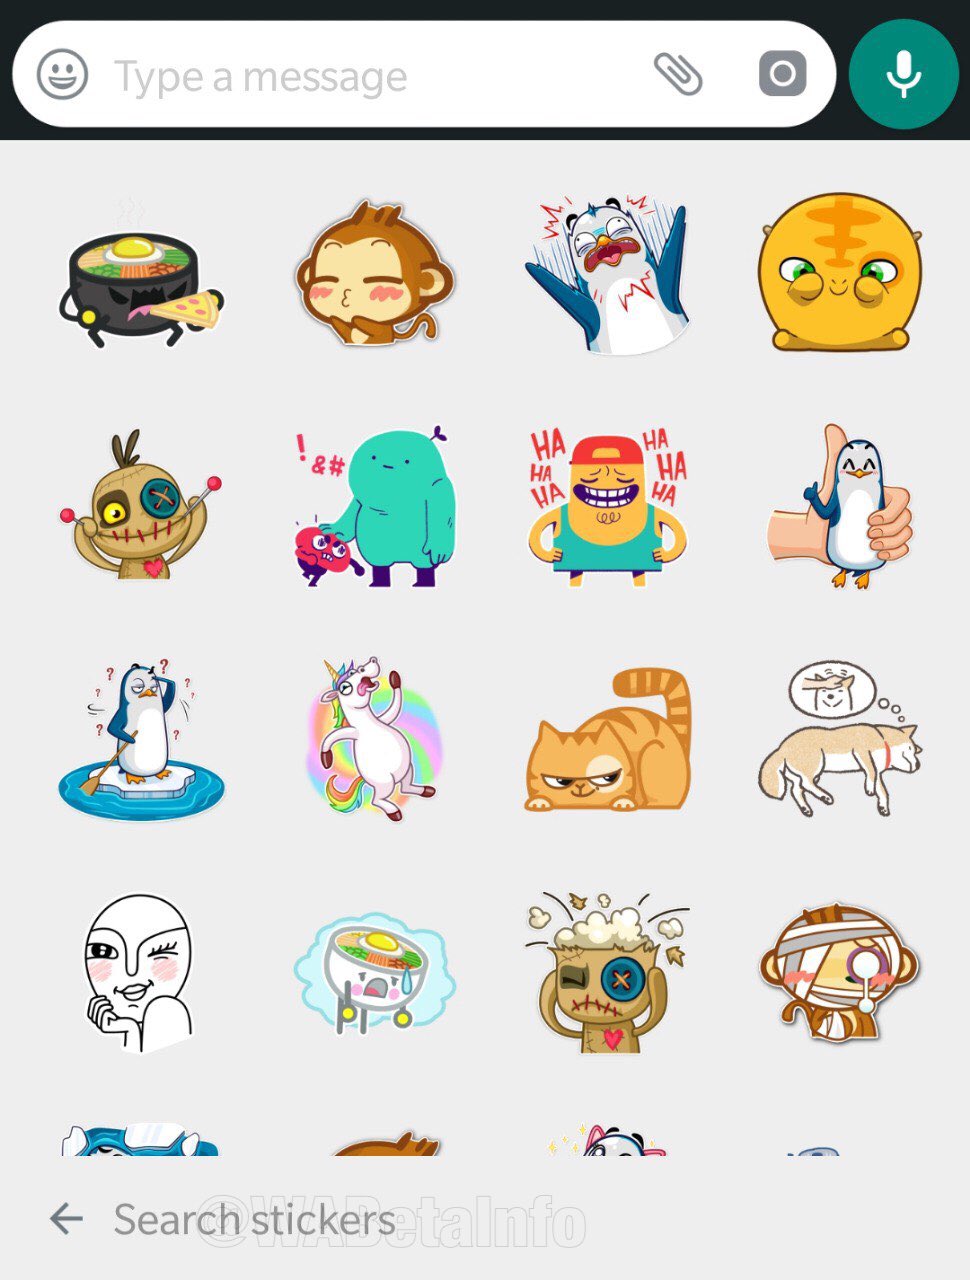 scheren Beschaven Meerdere WABetaInfo on Twitter: "WhatsApp is working on a stickers search feature on  Android, that will be available in future. It's under development.  https://t.co/ZtOK5RXrMB" / Twitter